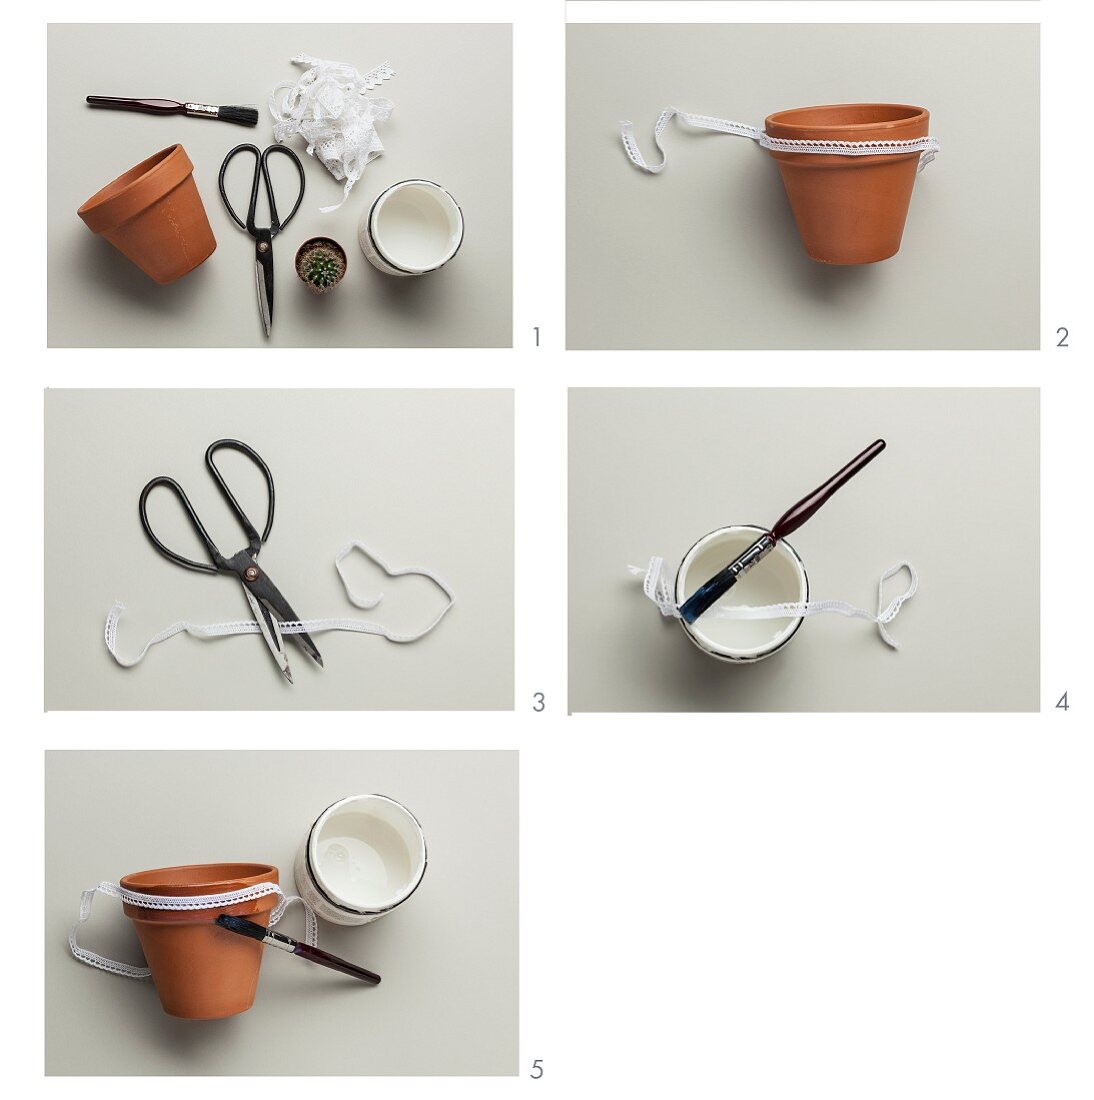 Craft utensils for decorating terracotta pots with lace trim